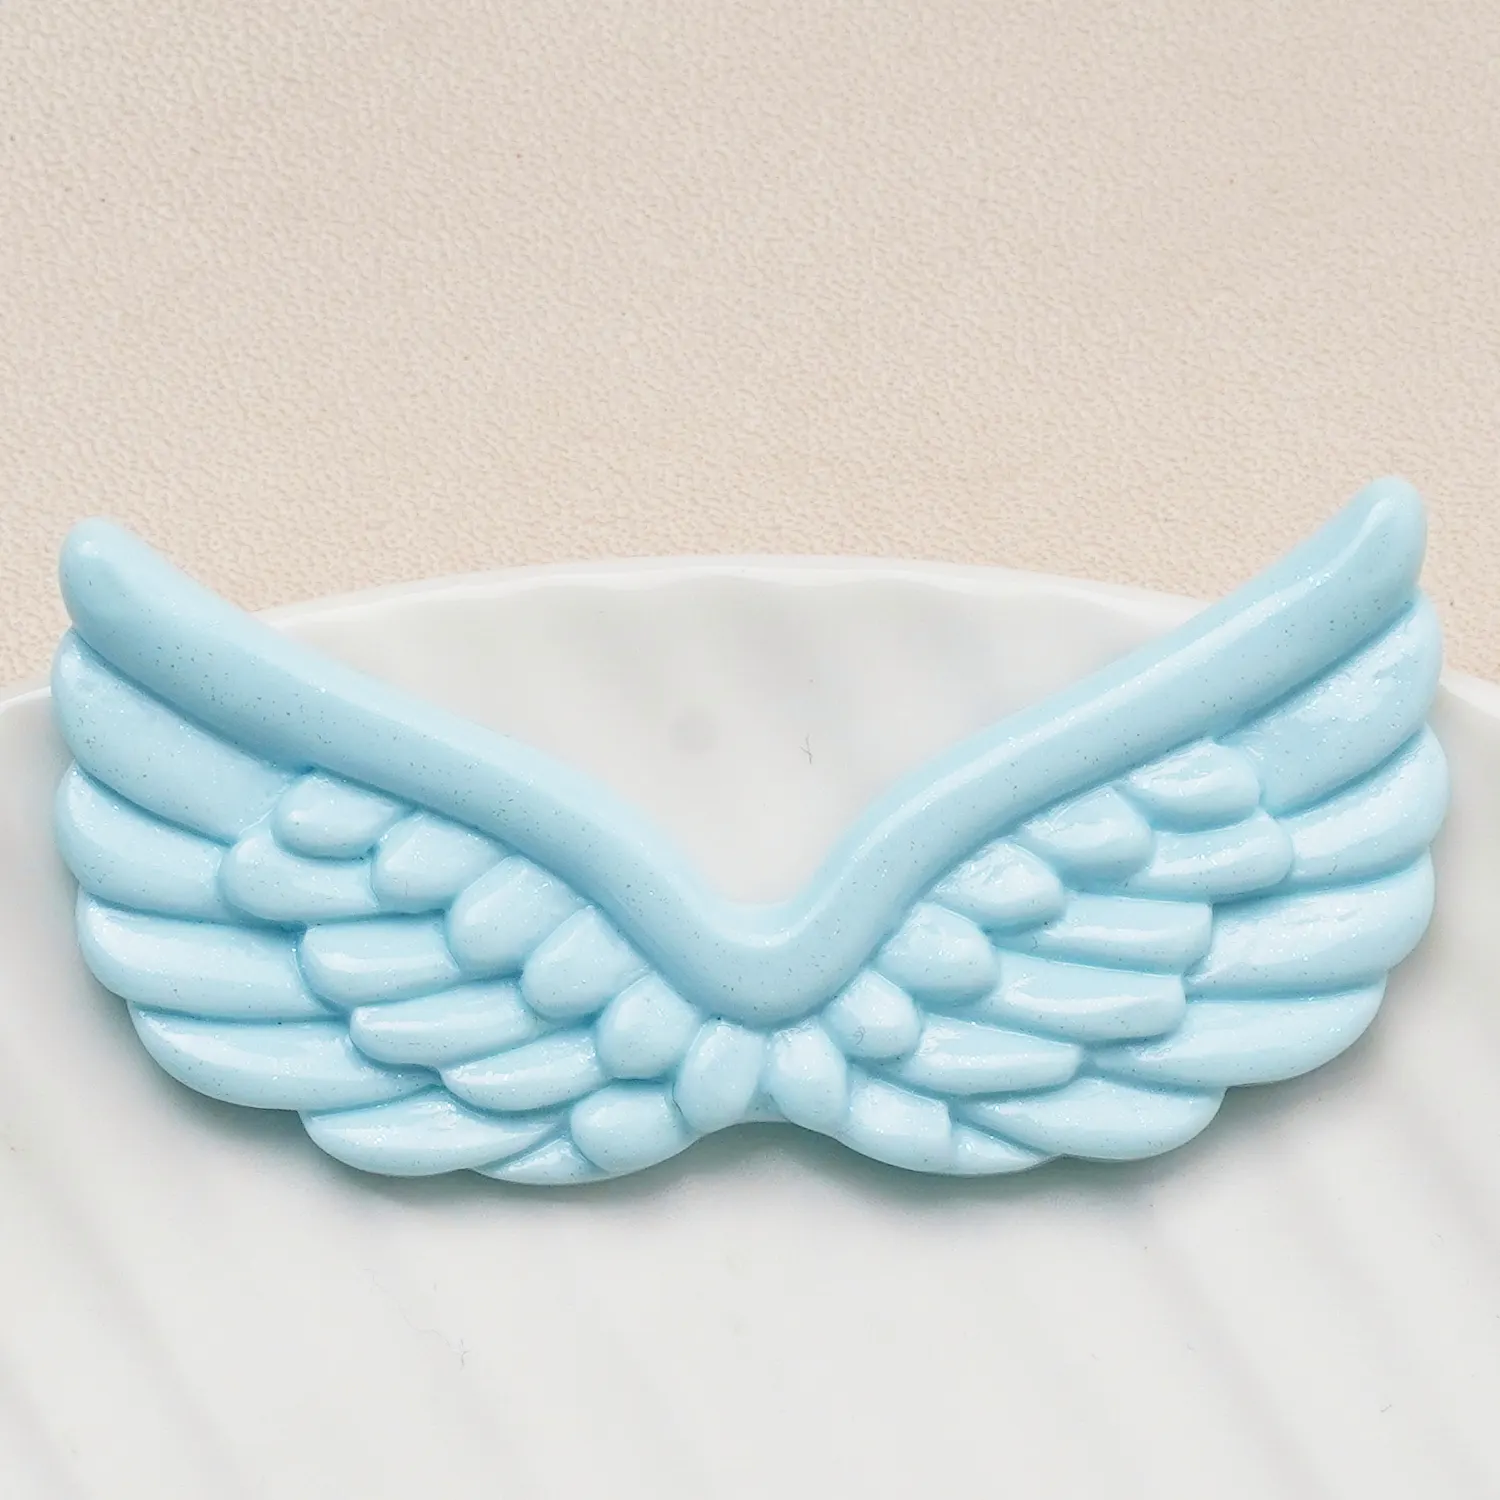 Wholesale Acrylic Wings Flatback Cabochon Resin Accessories For Refrigerator Magnet Bag Hanging DIY Hairpin Making Car Pendant